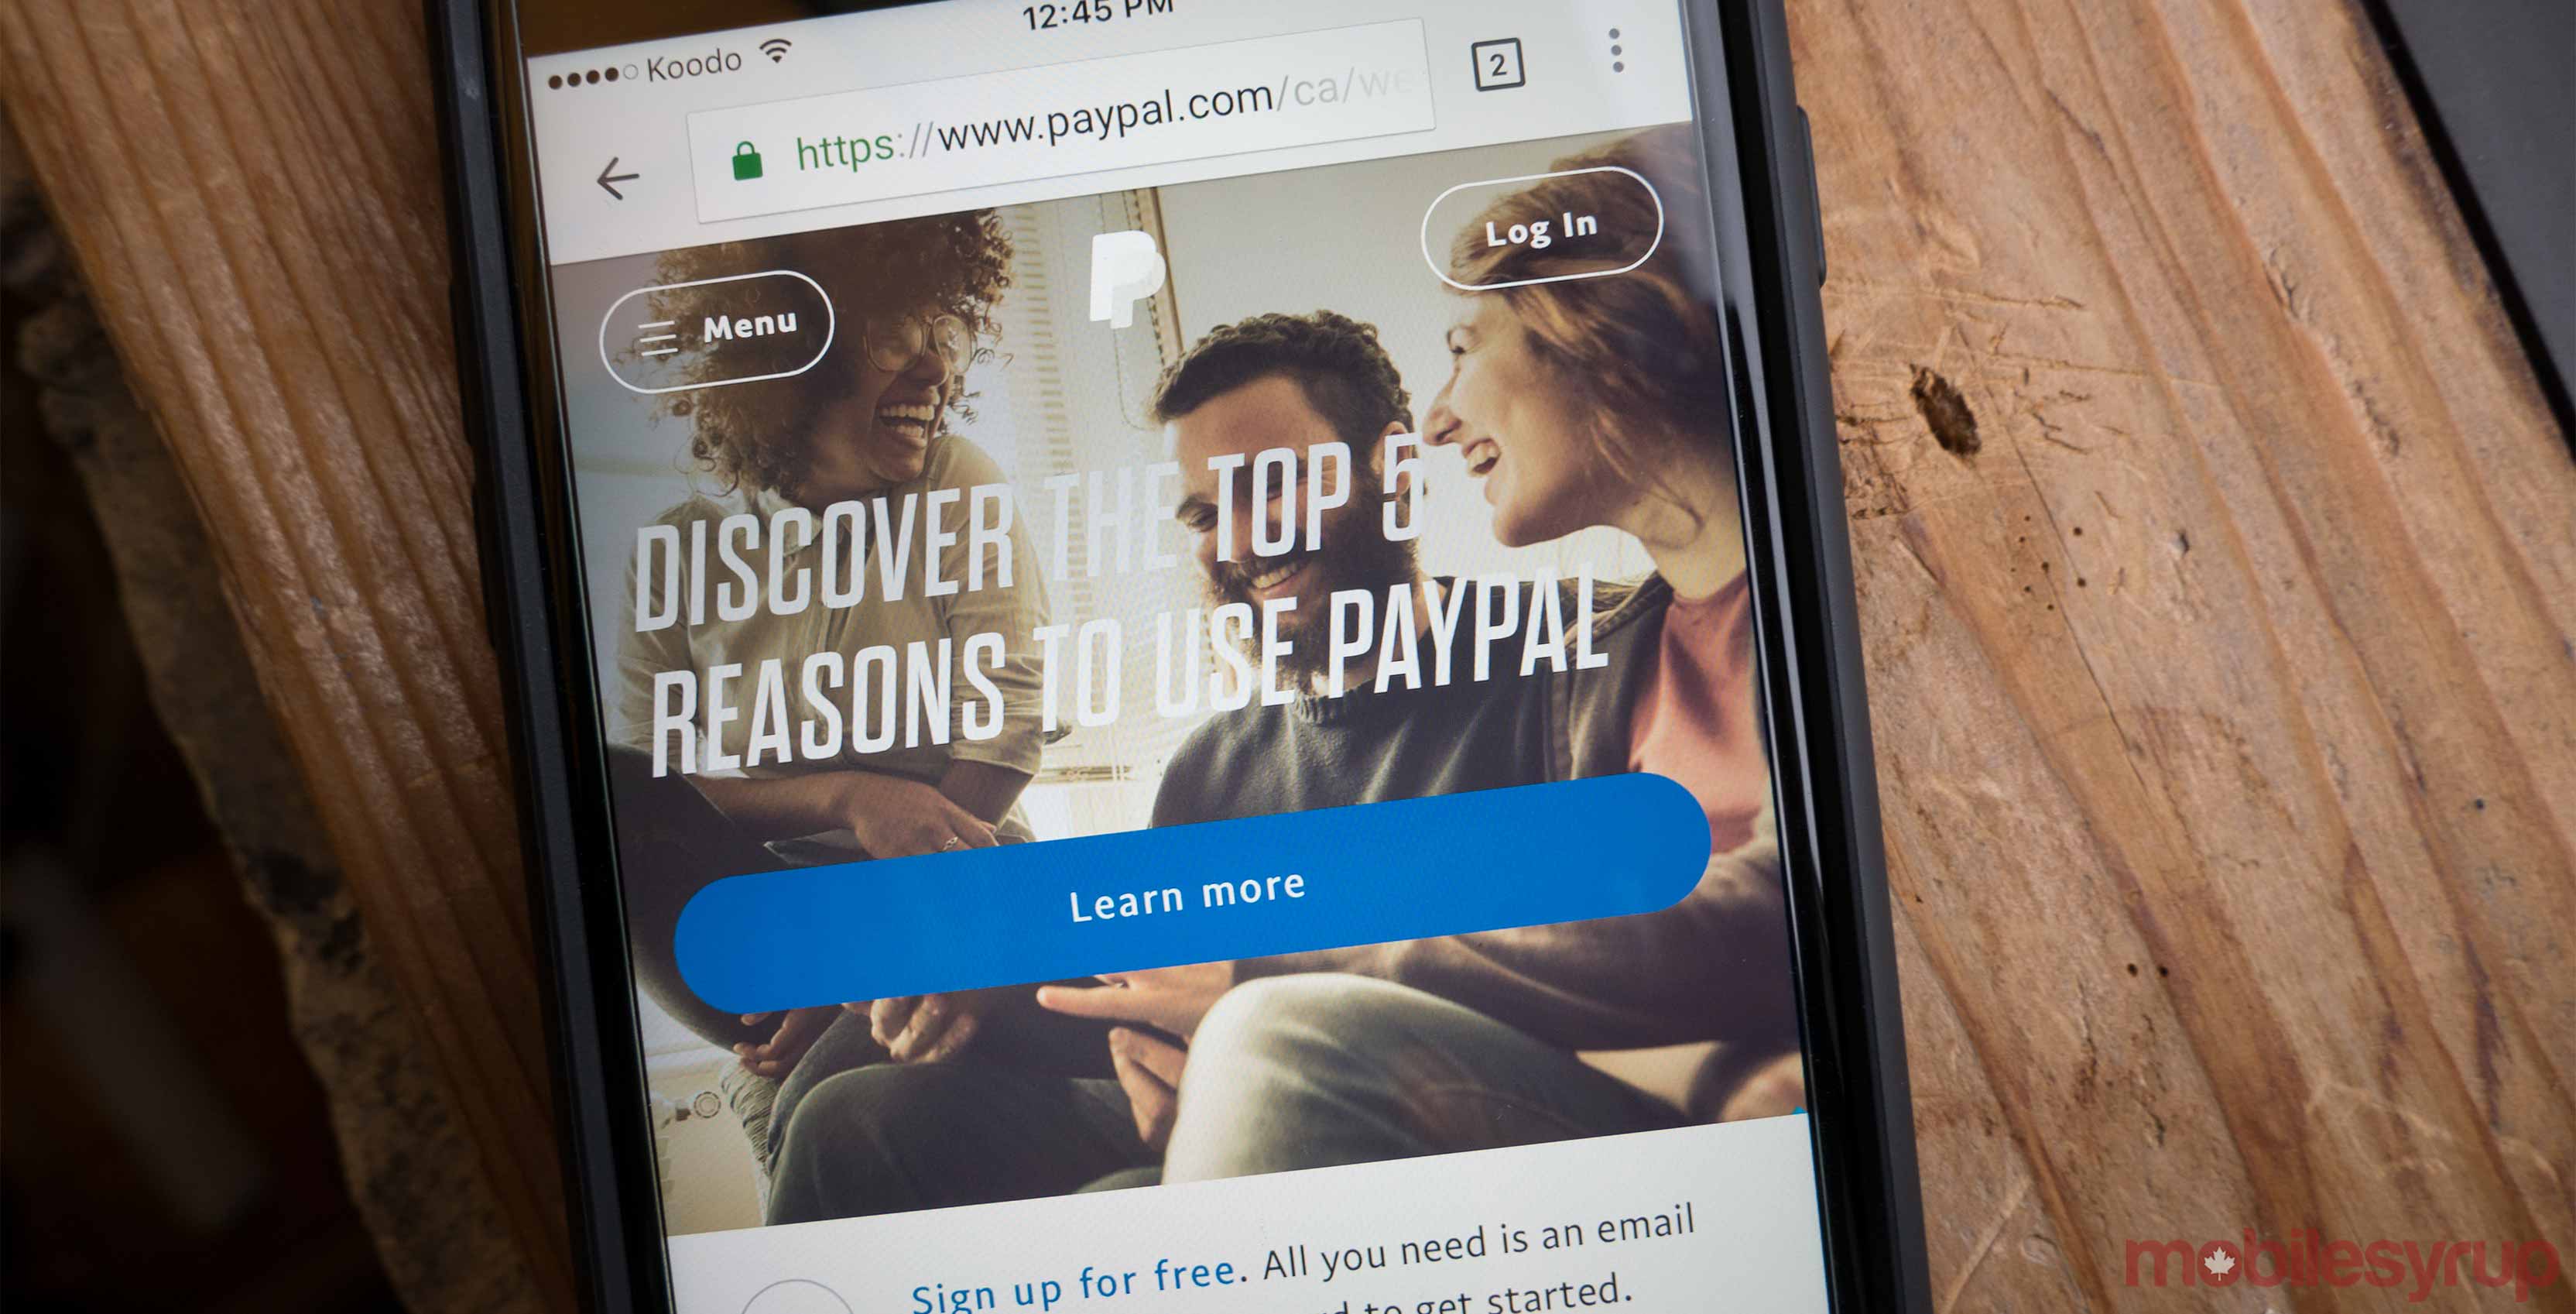 Paypal home page on a smartphone - peer-to-peer payments